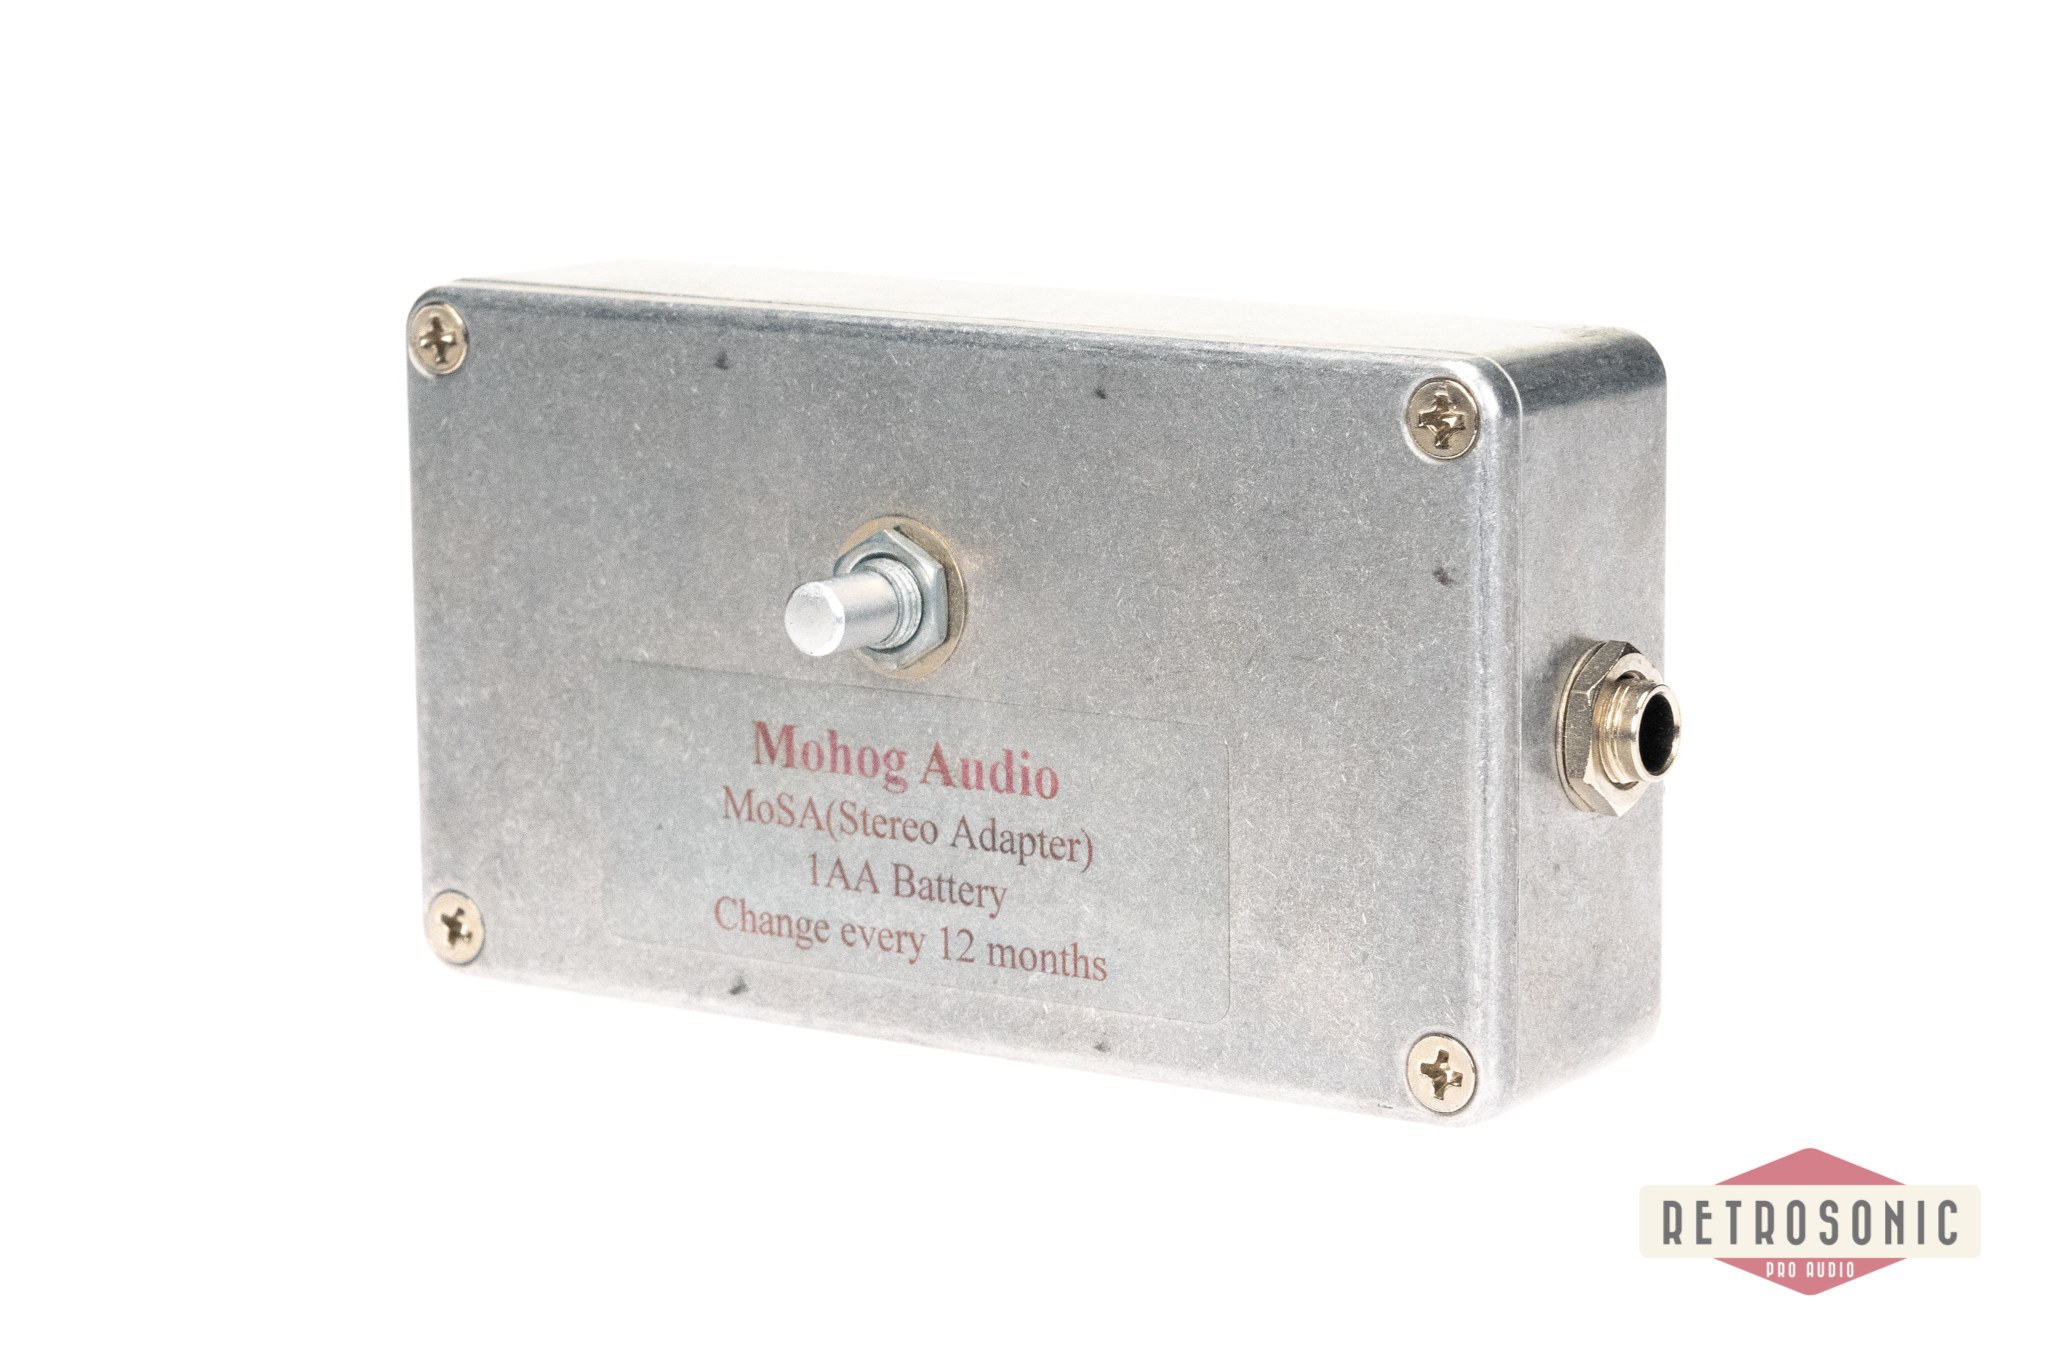 Mohog MoSa Stereo adapter for MoFet 76 compressors